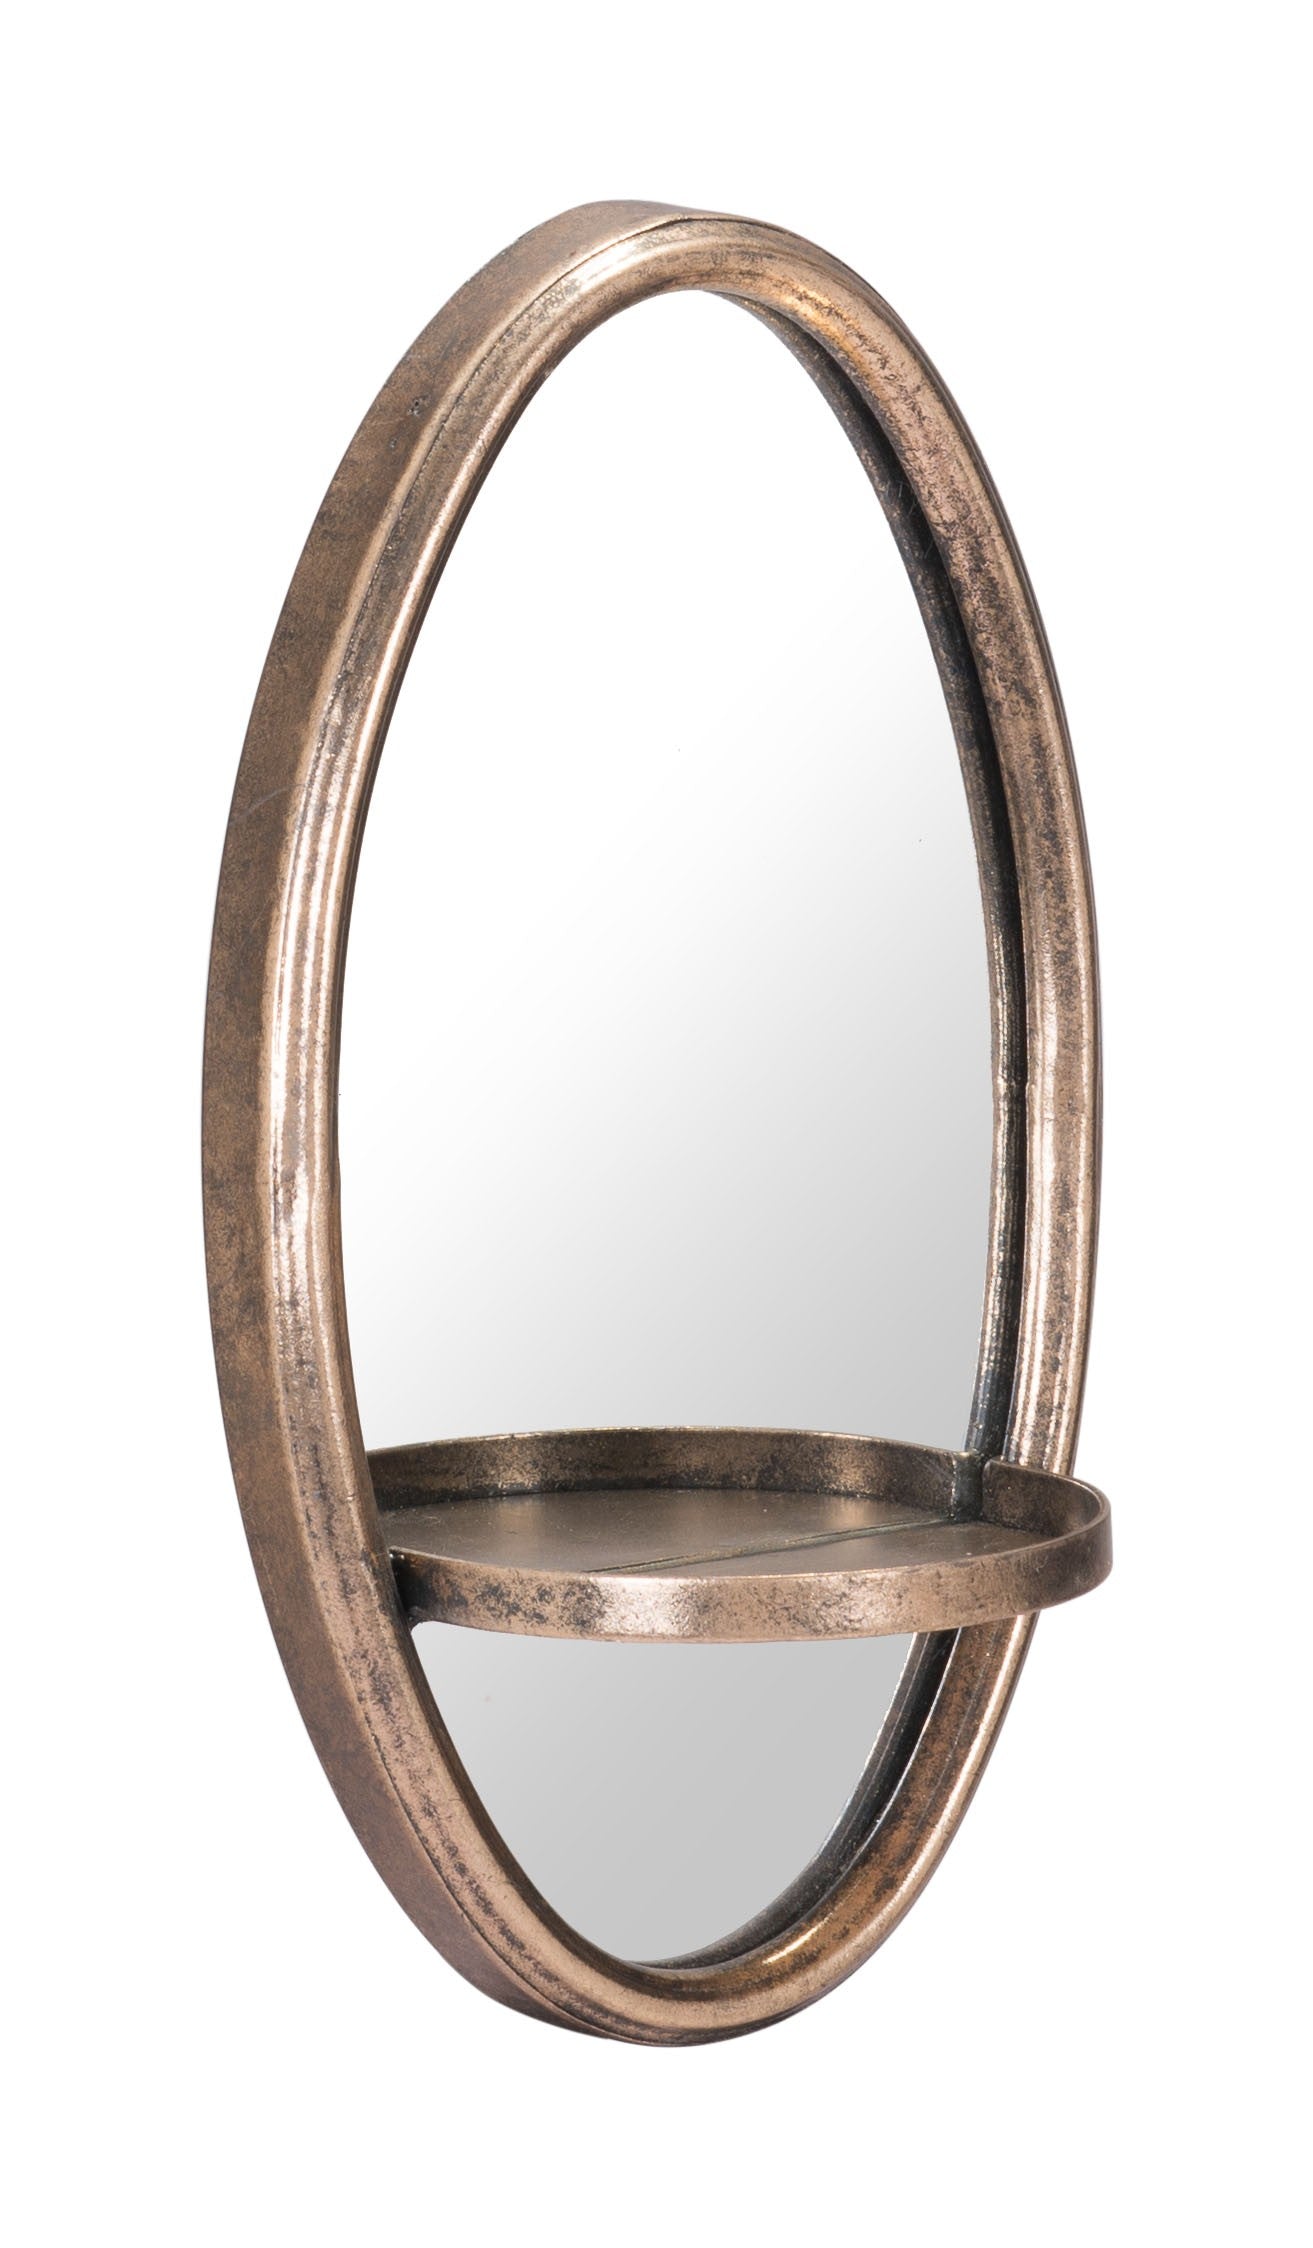 Antiqued Gold Oval Mirror with Petite Shelf